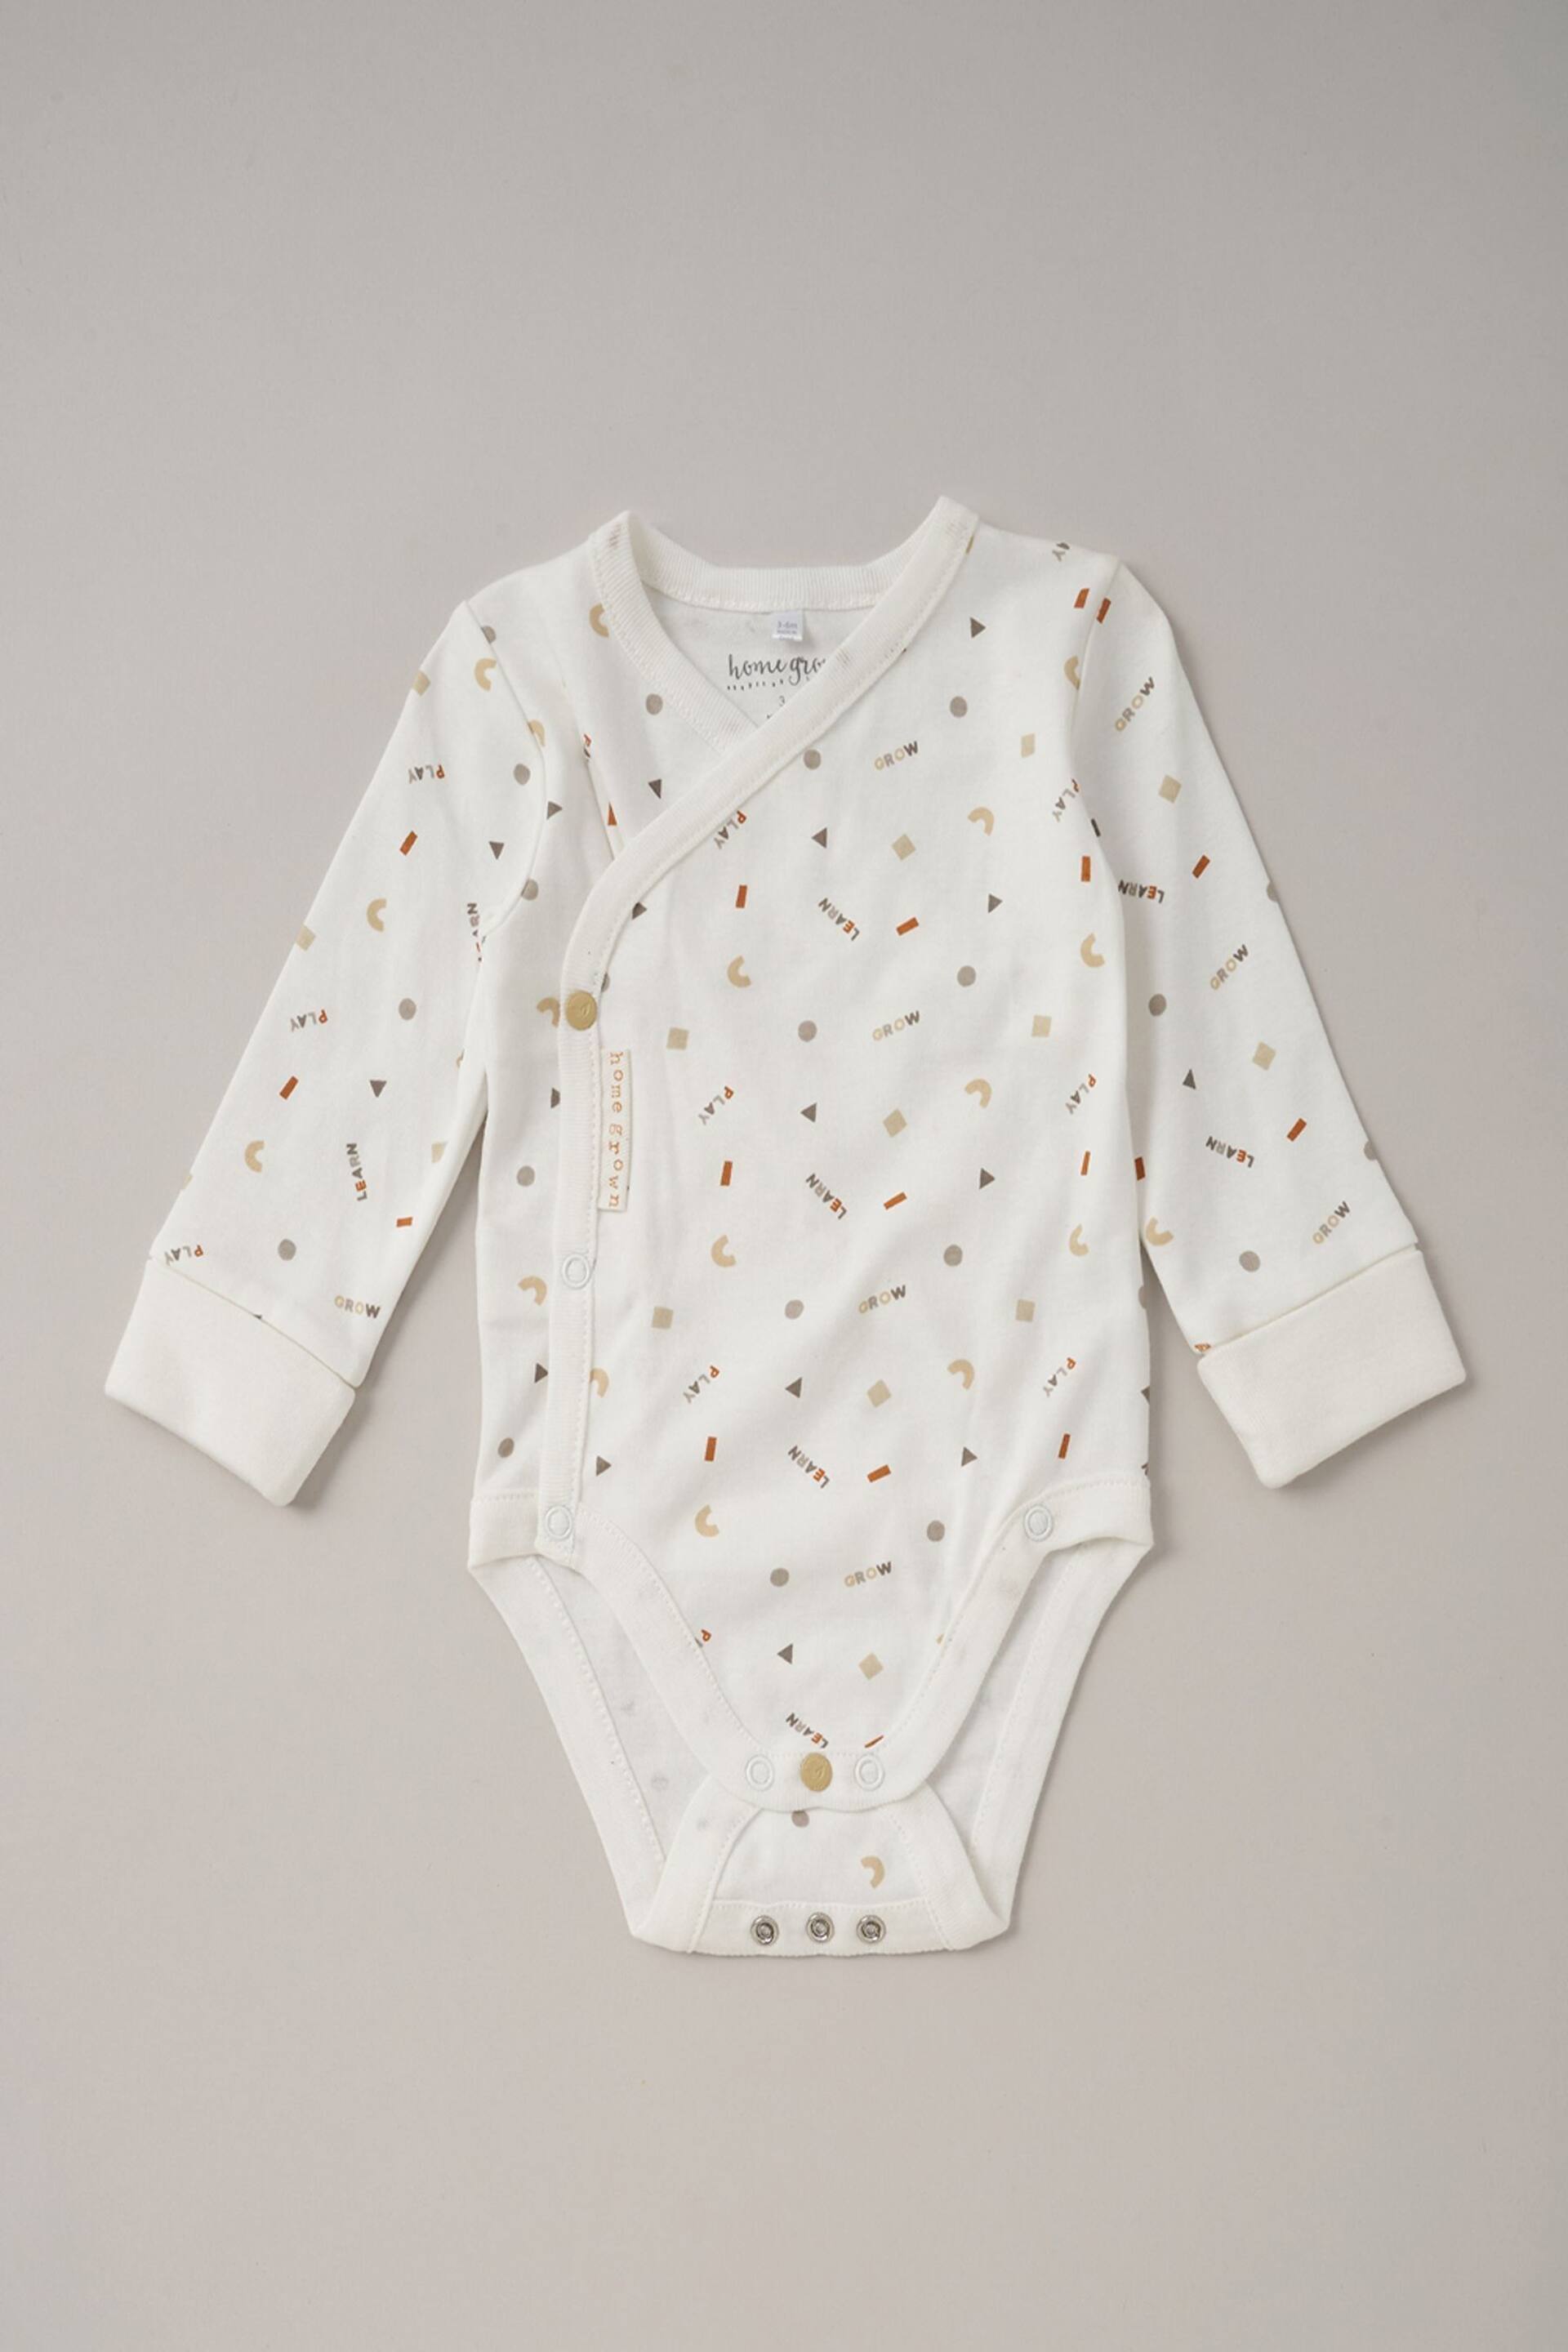 Homegrown White Cotton Bodysuit, Trouser and Bibs Set - Image 2 of 5